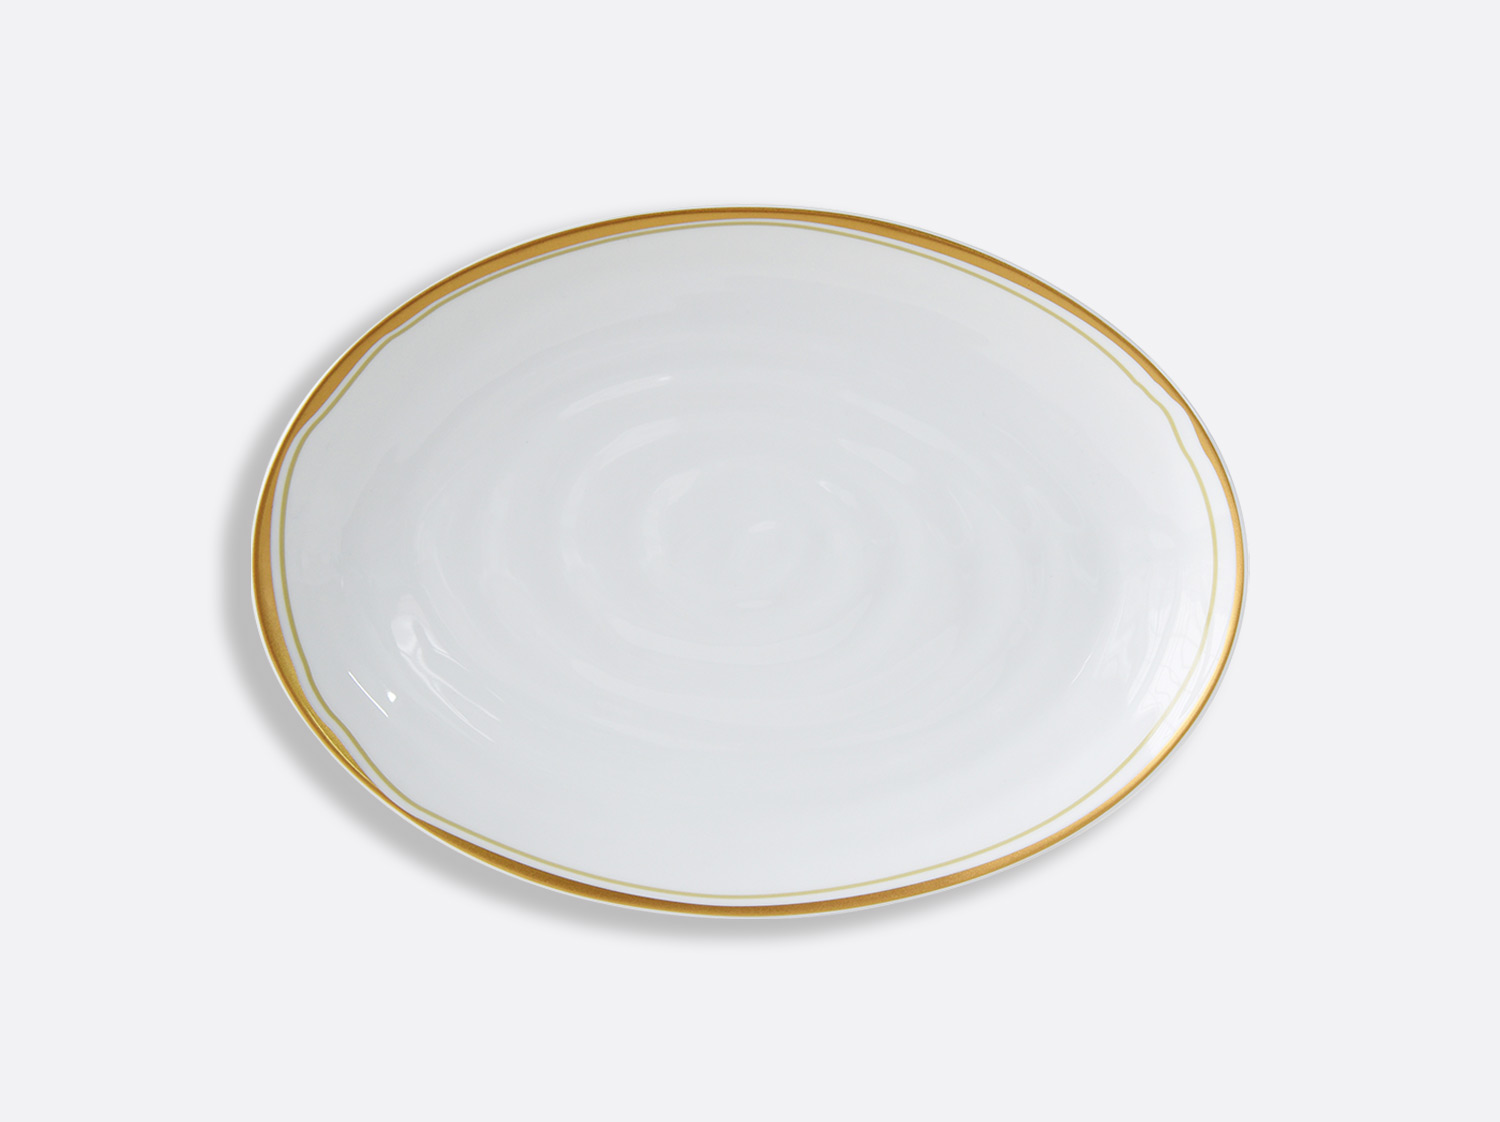 China Oval platter 13.5" of the collection ALBÂTRE | Bernardaud